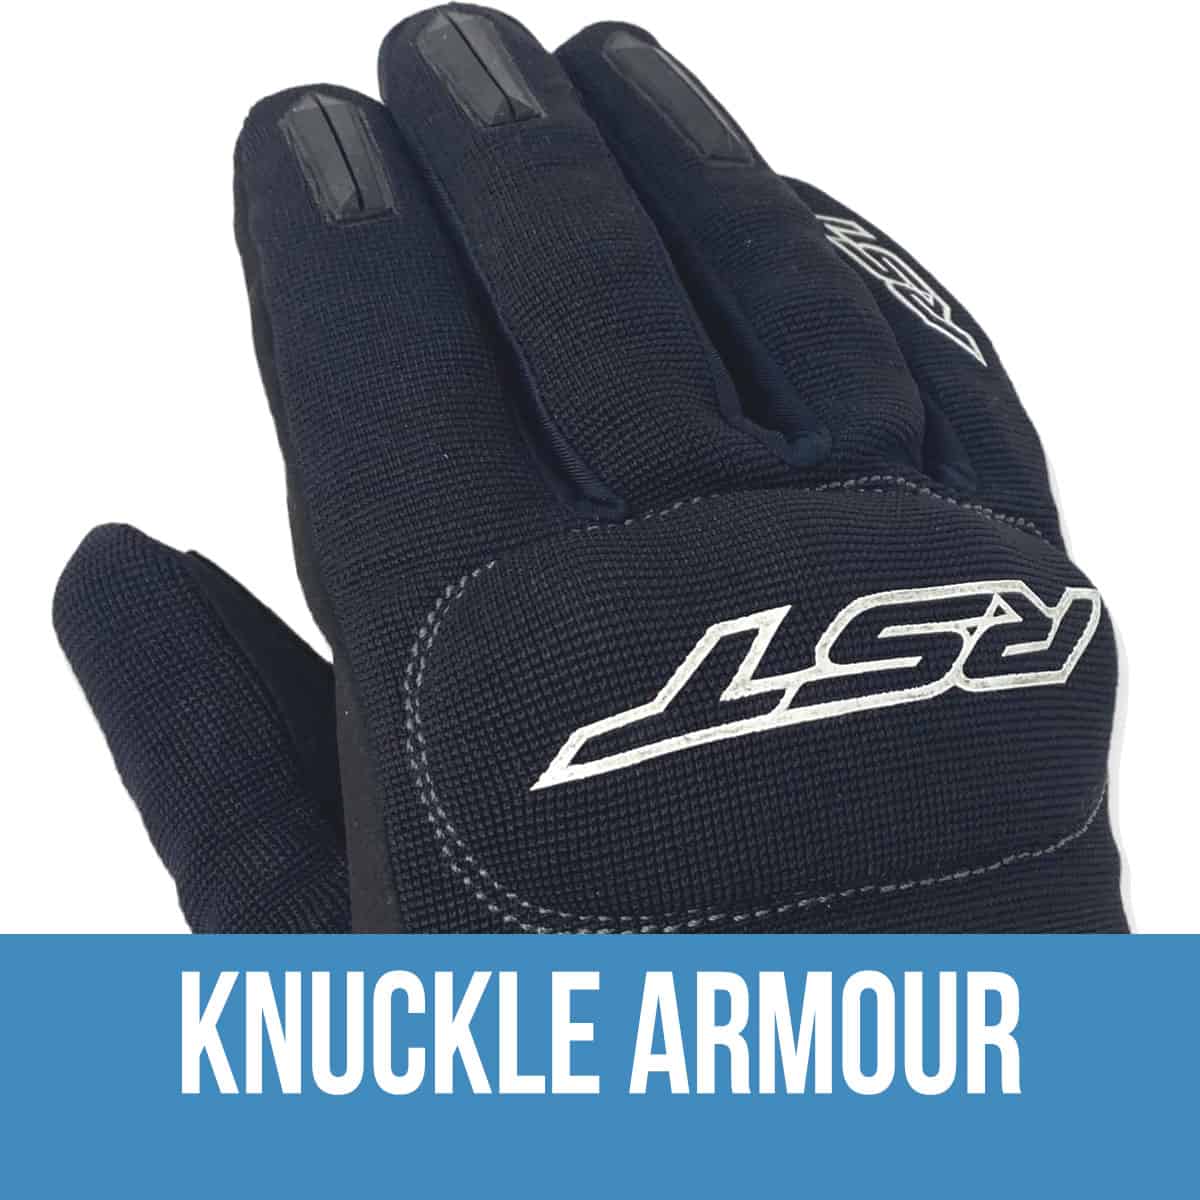 RST Rider 2100 CE-certified Gloves: Light-weight summer gloves for urban rides & touring Knuckle protection